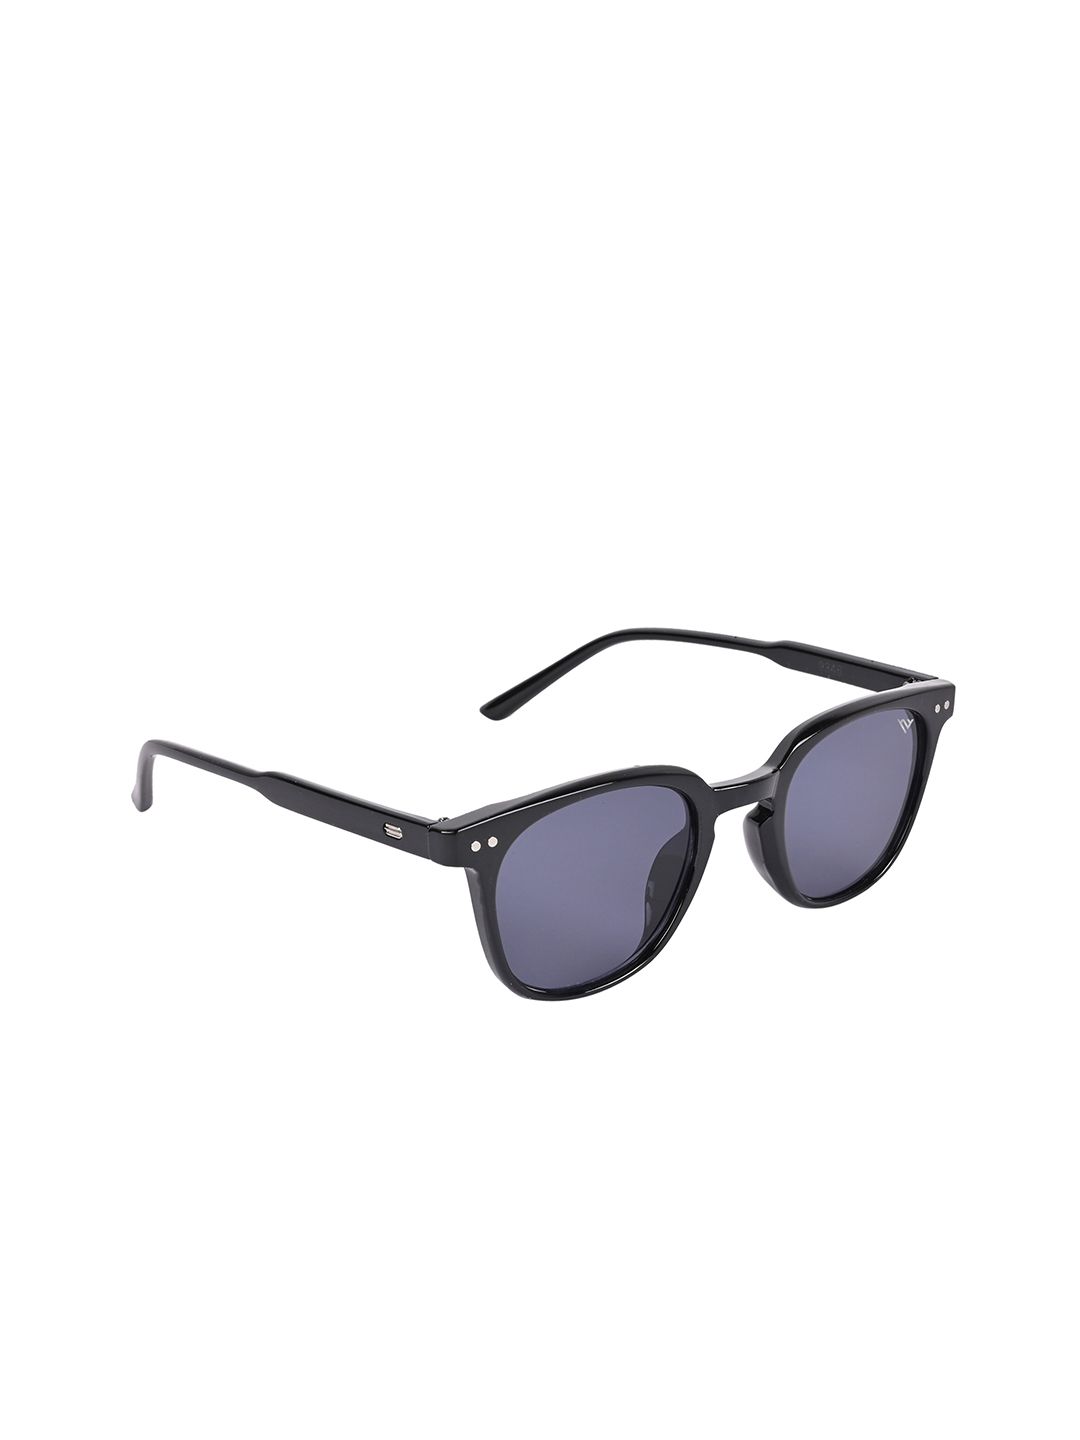 Voyage Unisex Black Lens & Black Round Sunglasses with UV Protected Lens Price in India